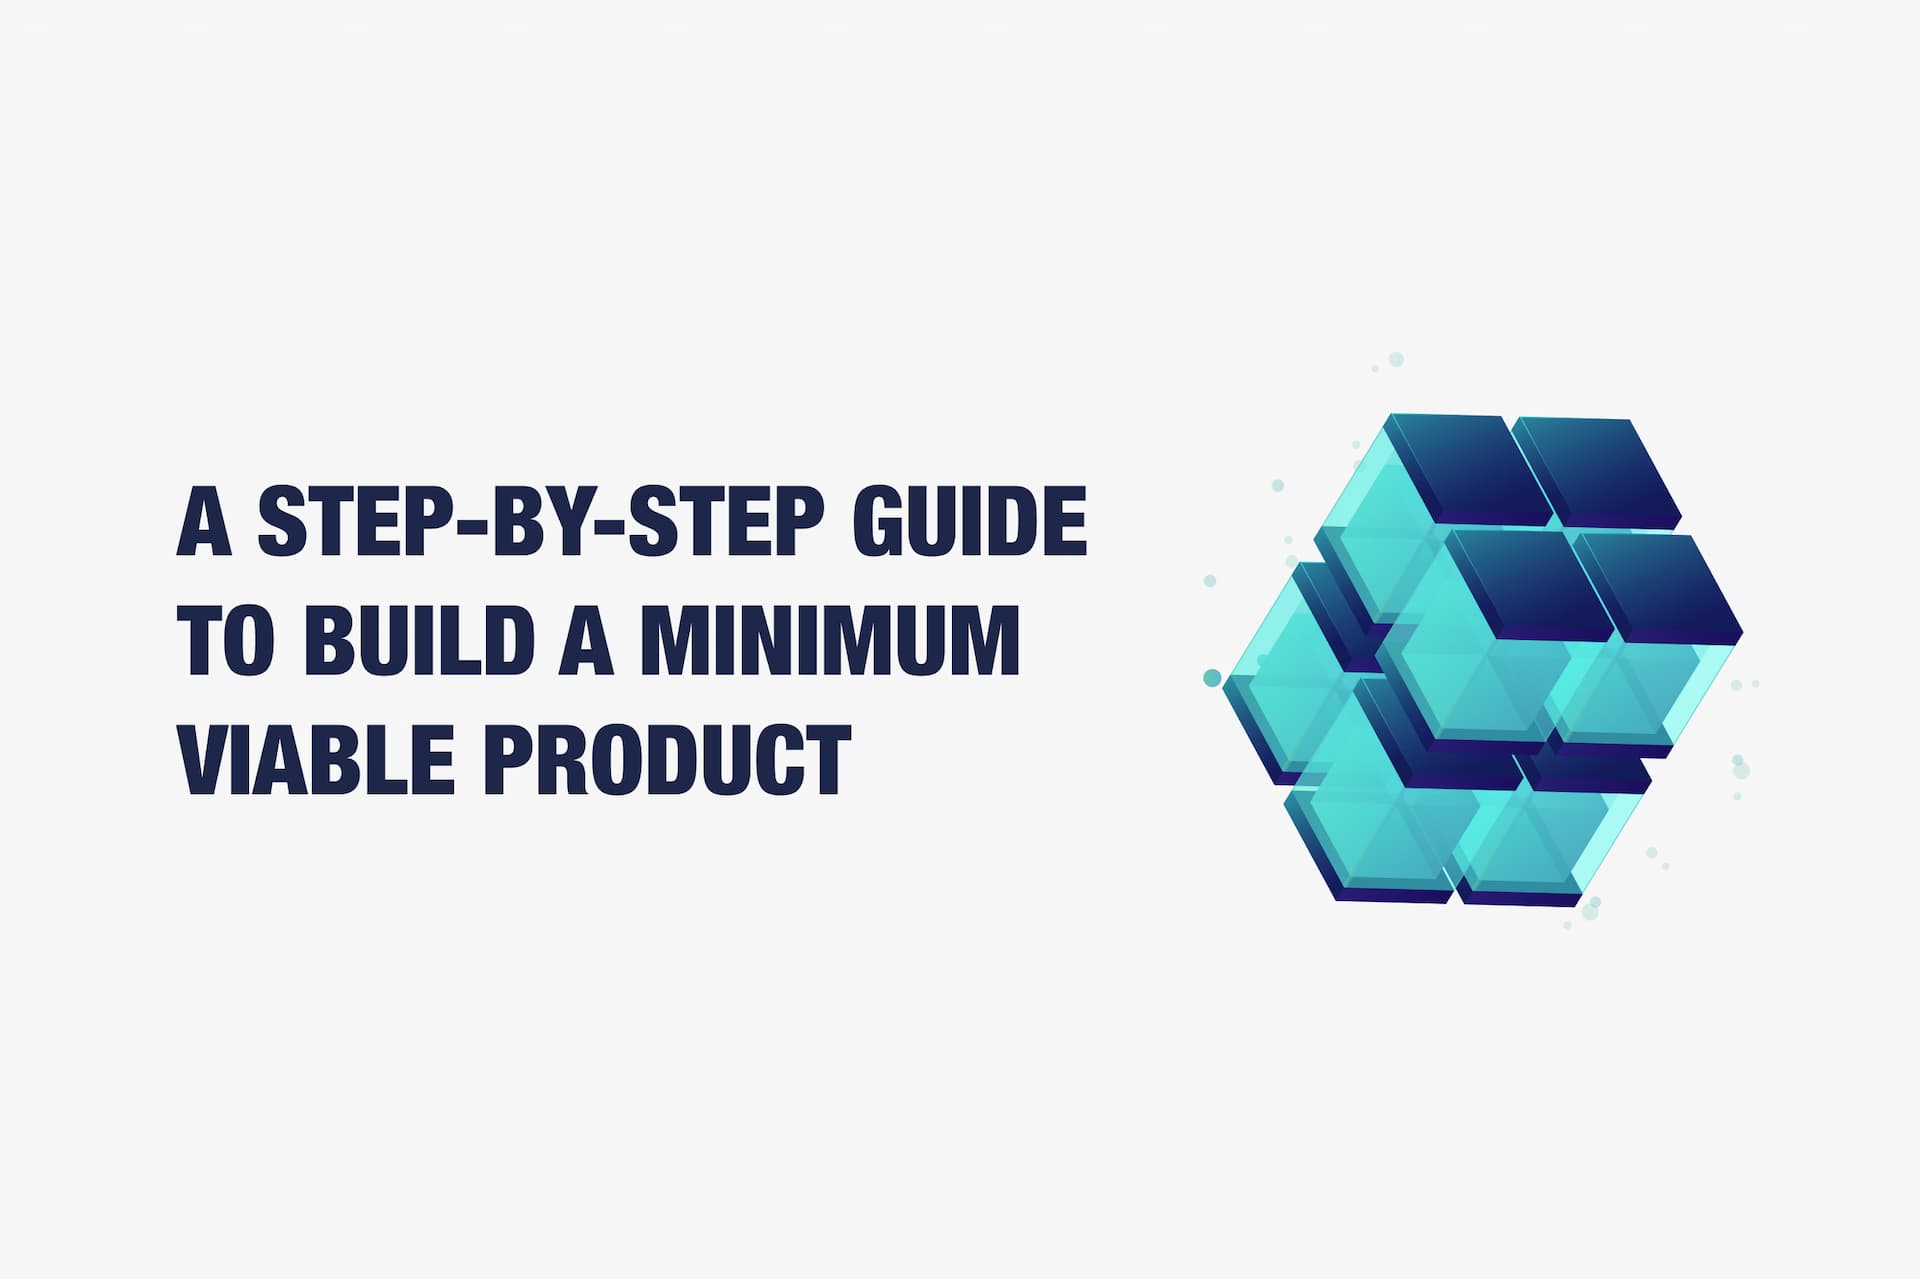 A Step-by-Step Guide to Build a Minimum Viable Product